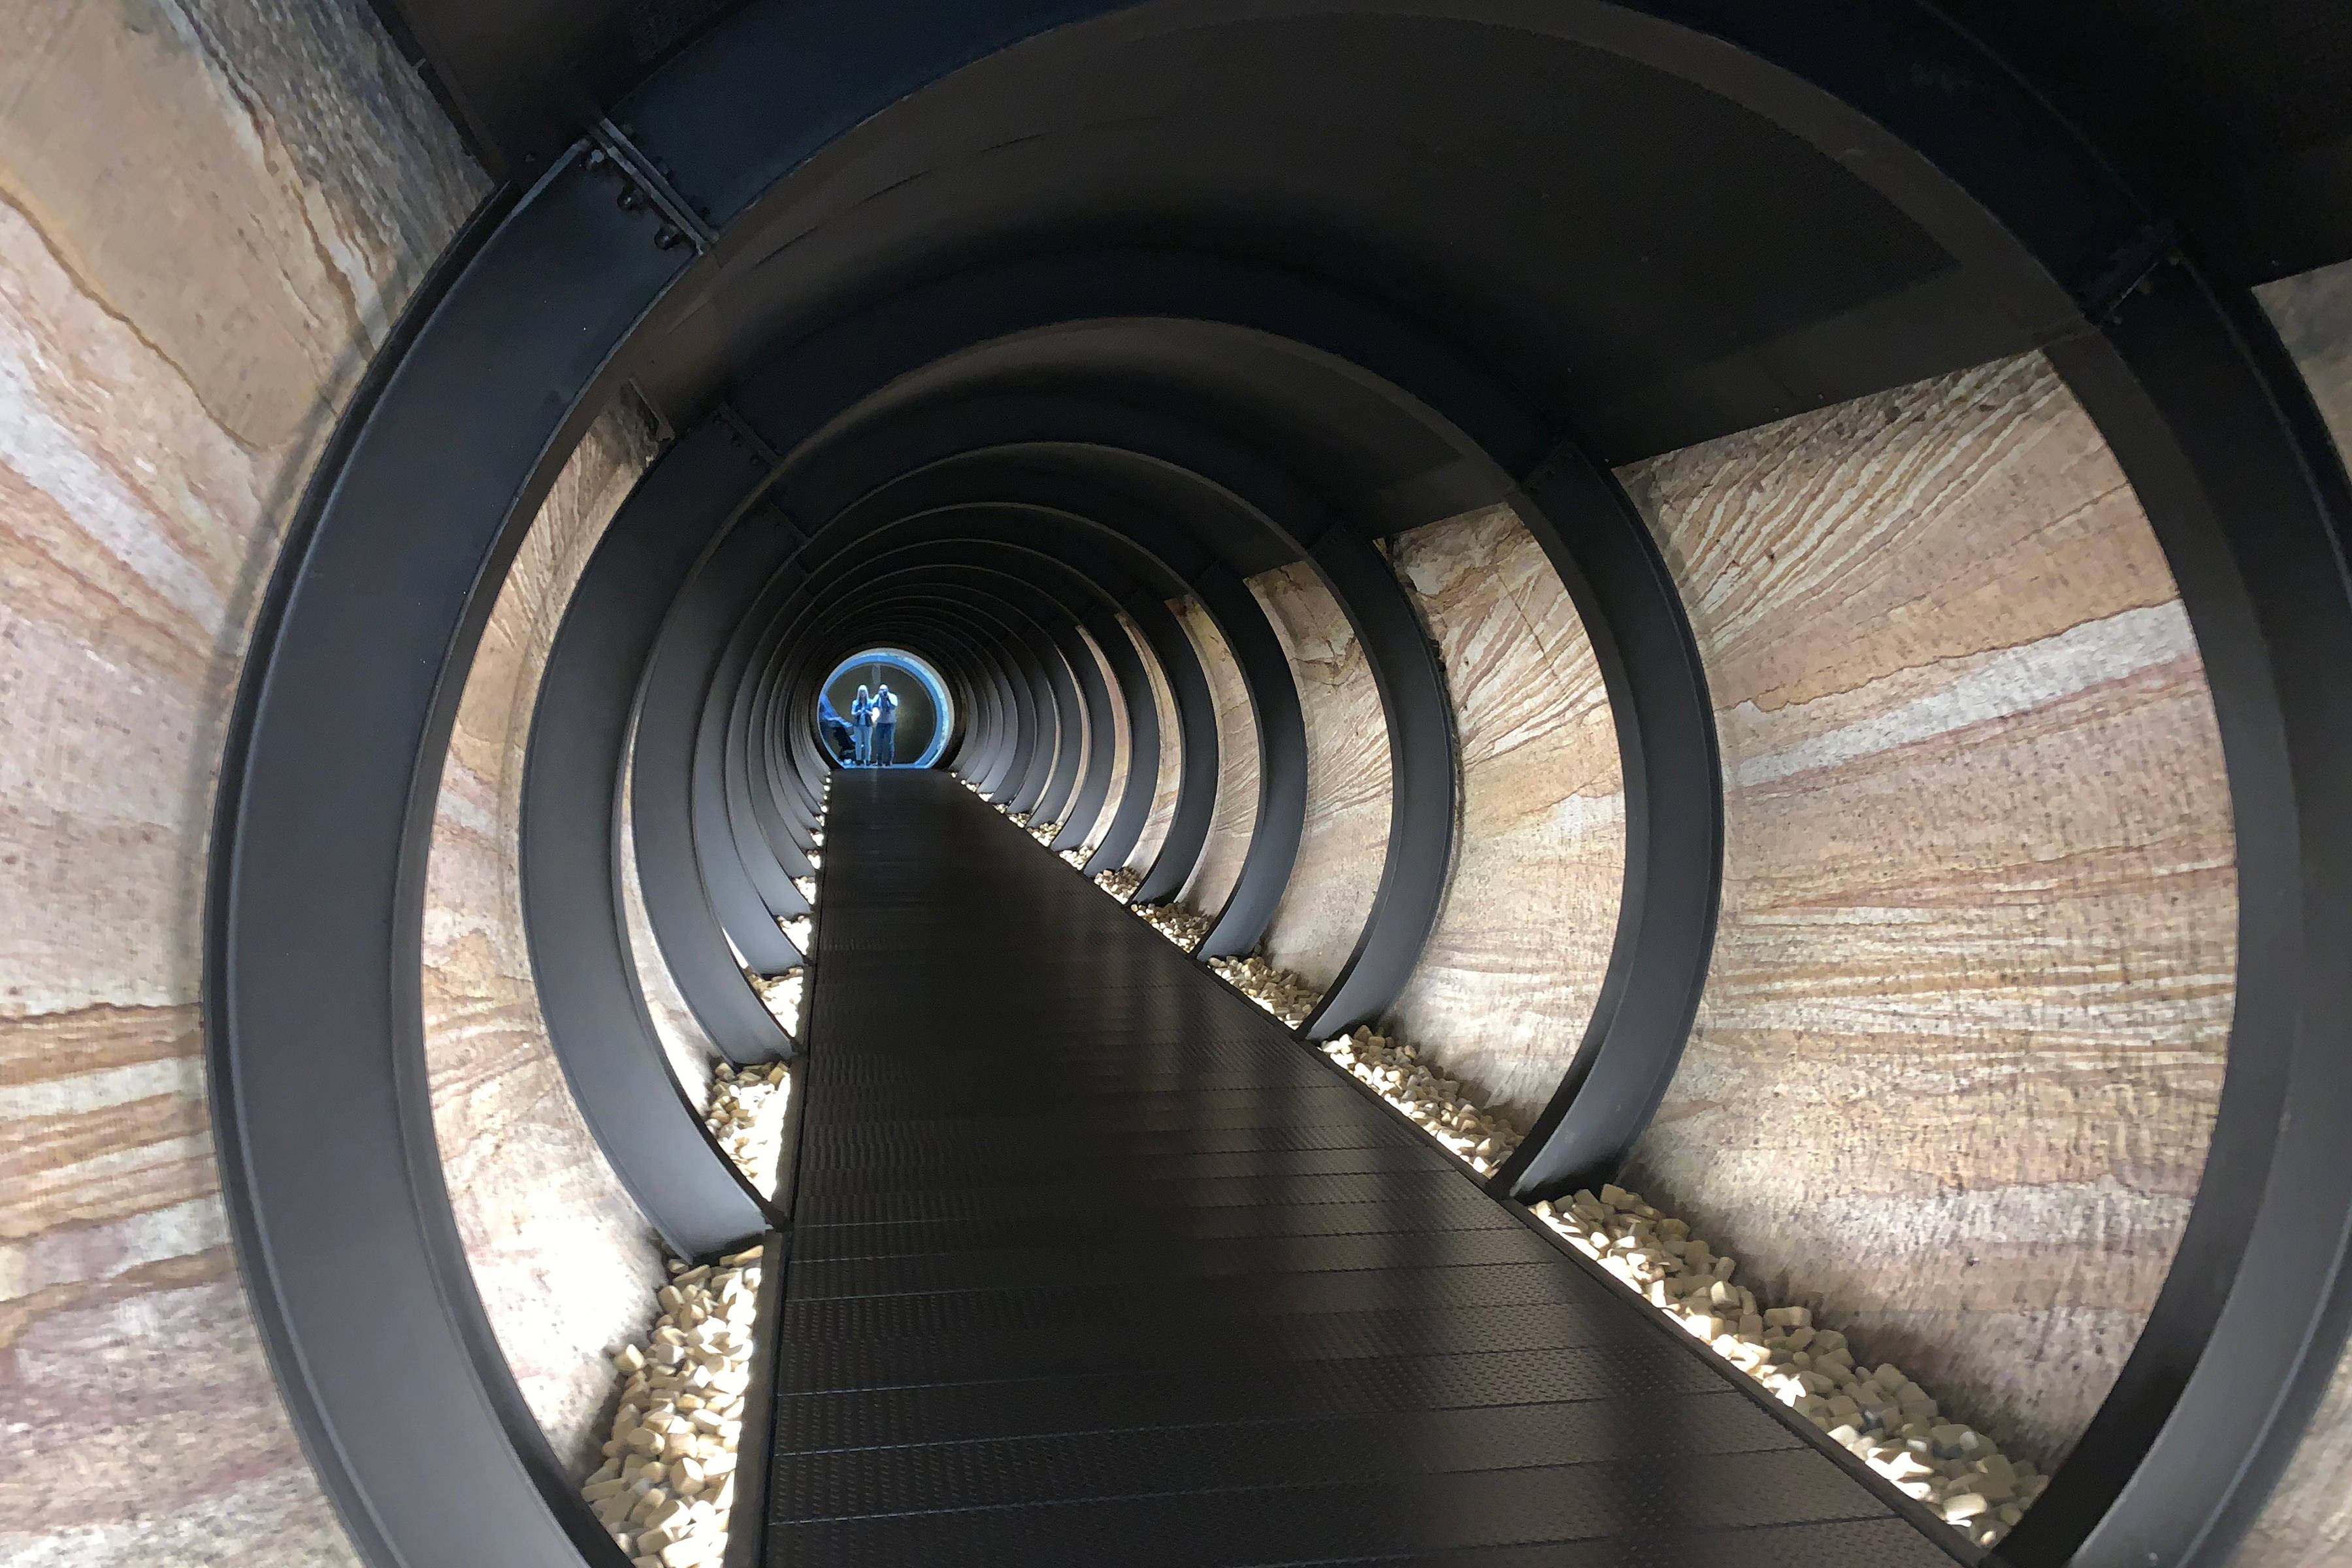 Circular tunnel with exposed sandstone walls at Mona which forms part of the Siloam tunnel network, connecting gallery spaces.